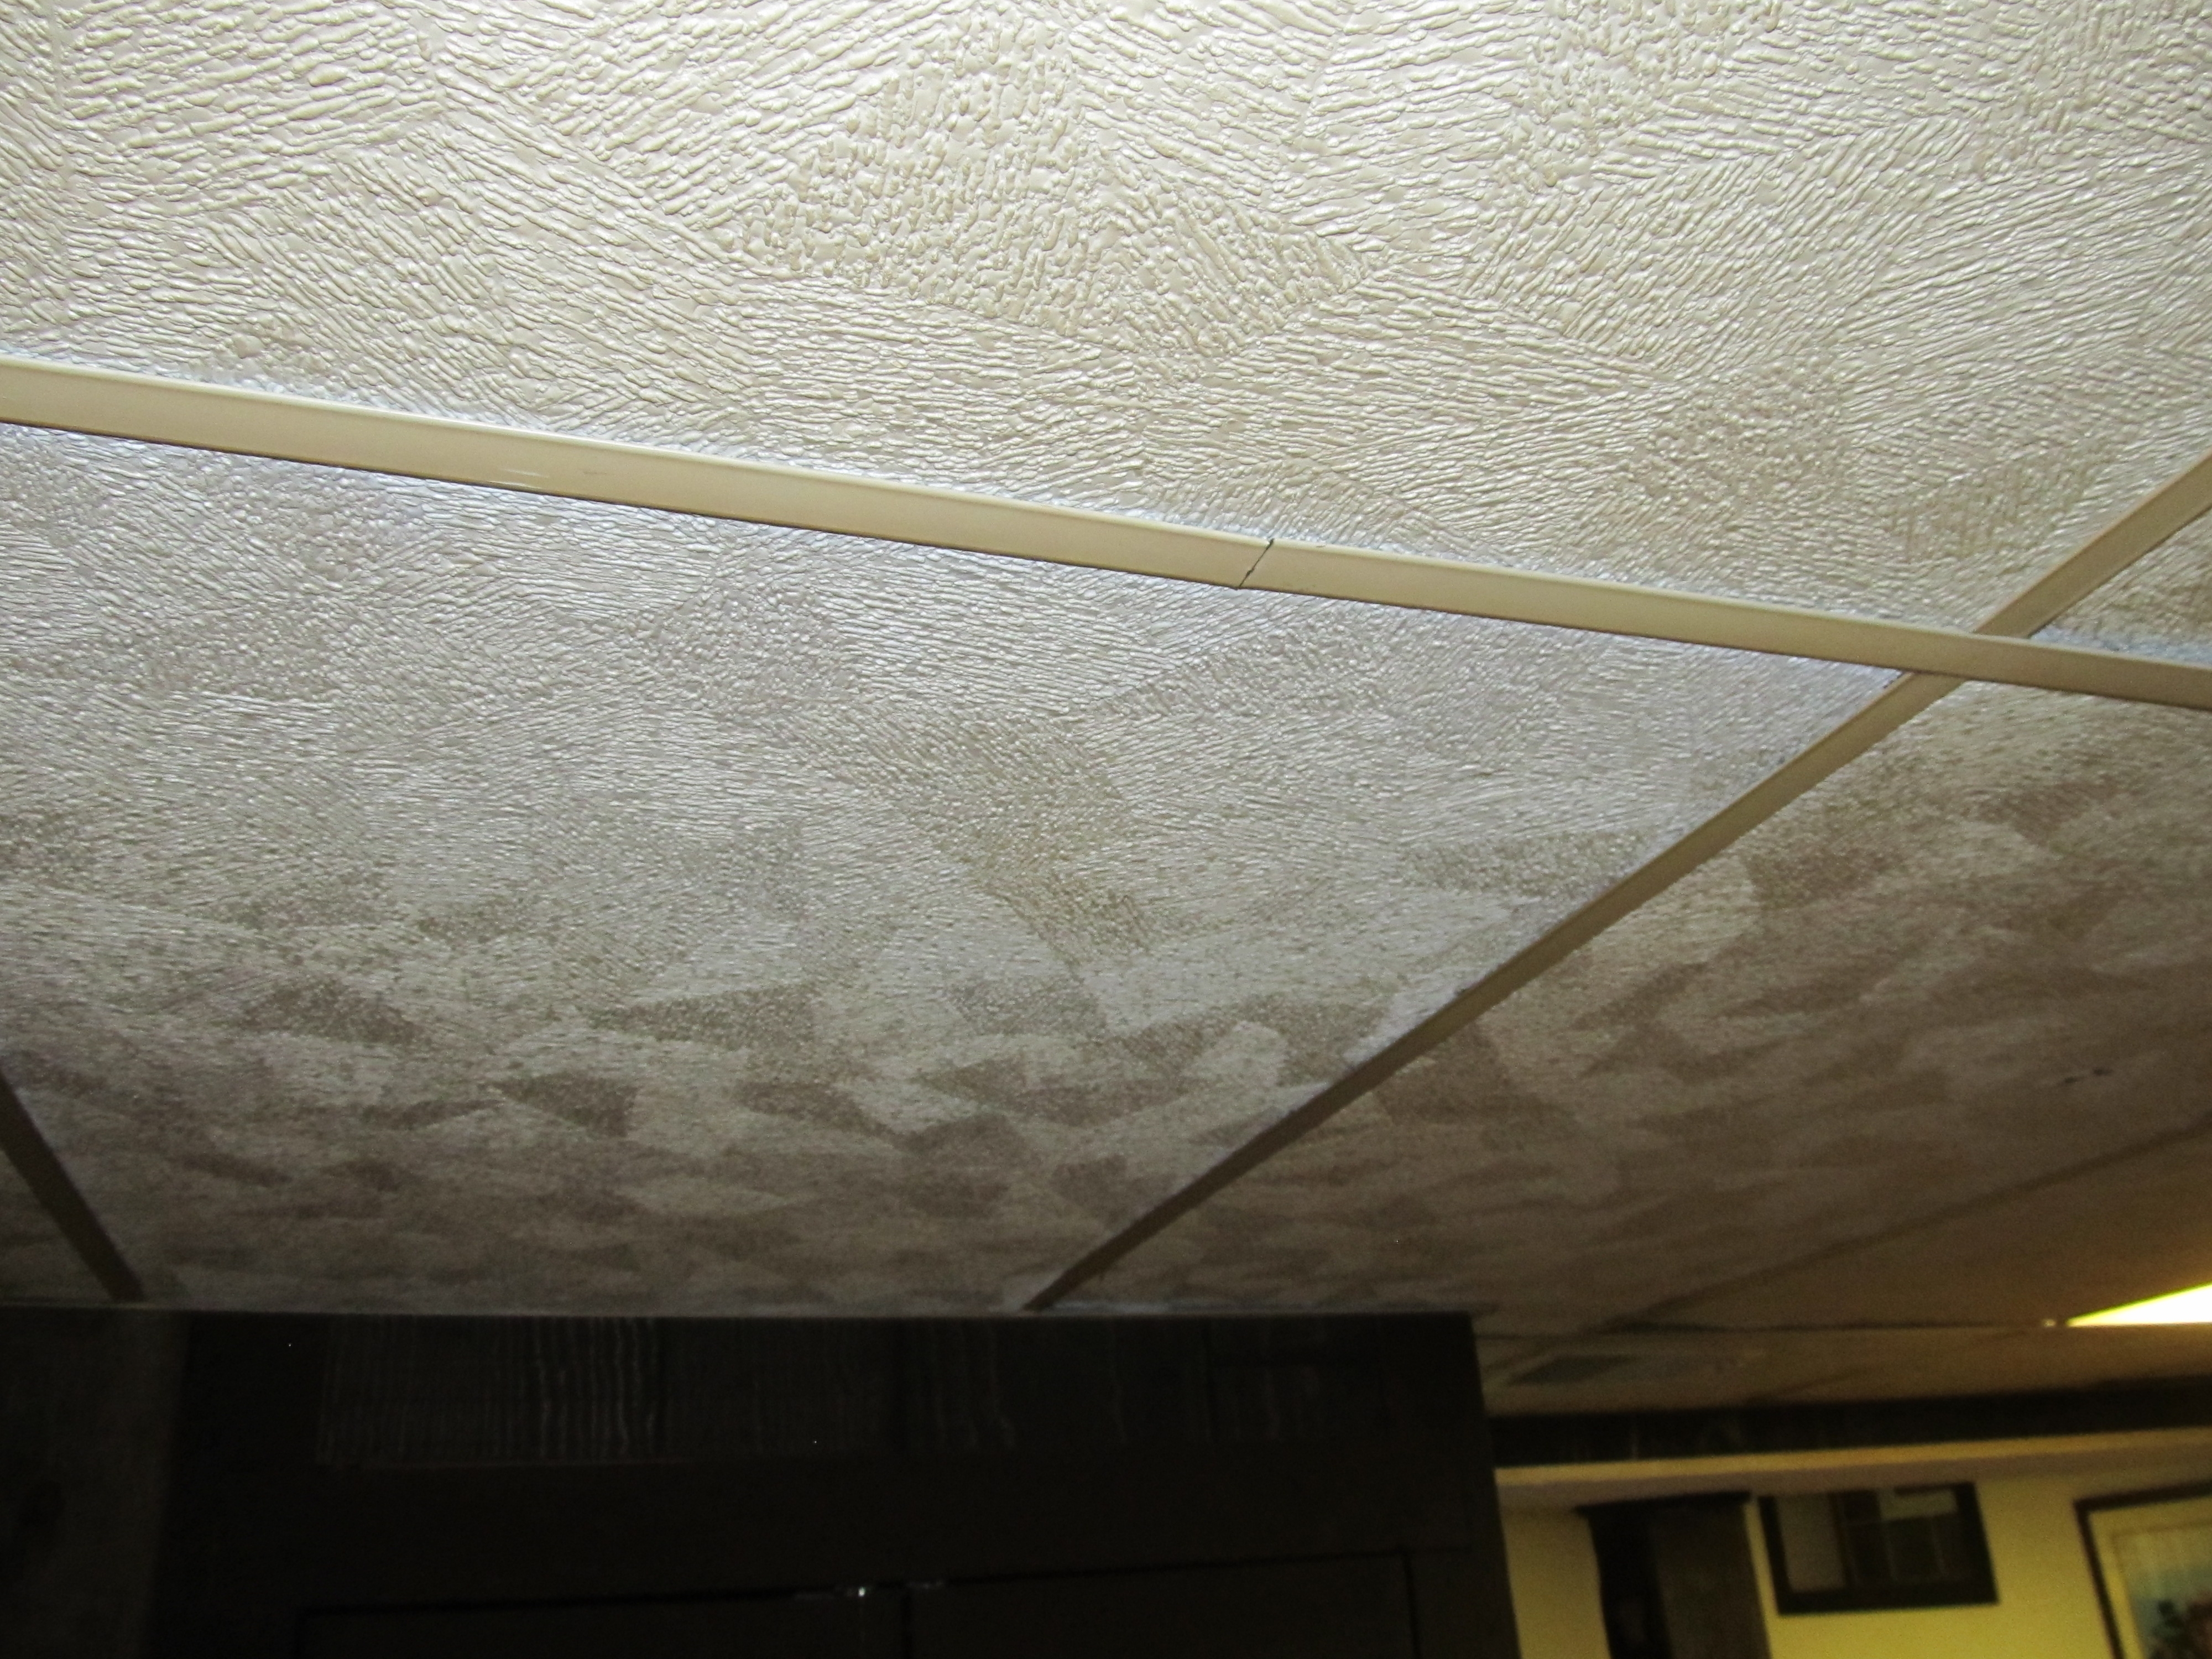 Fabric Covered Ceiling Tilestutorial cover ugly ceiling tiles with fabric the tromp queen